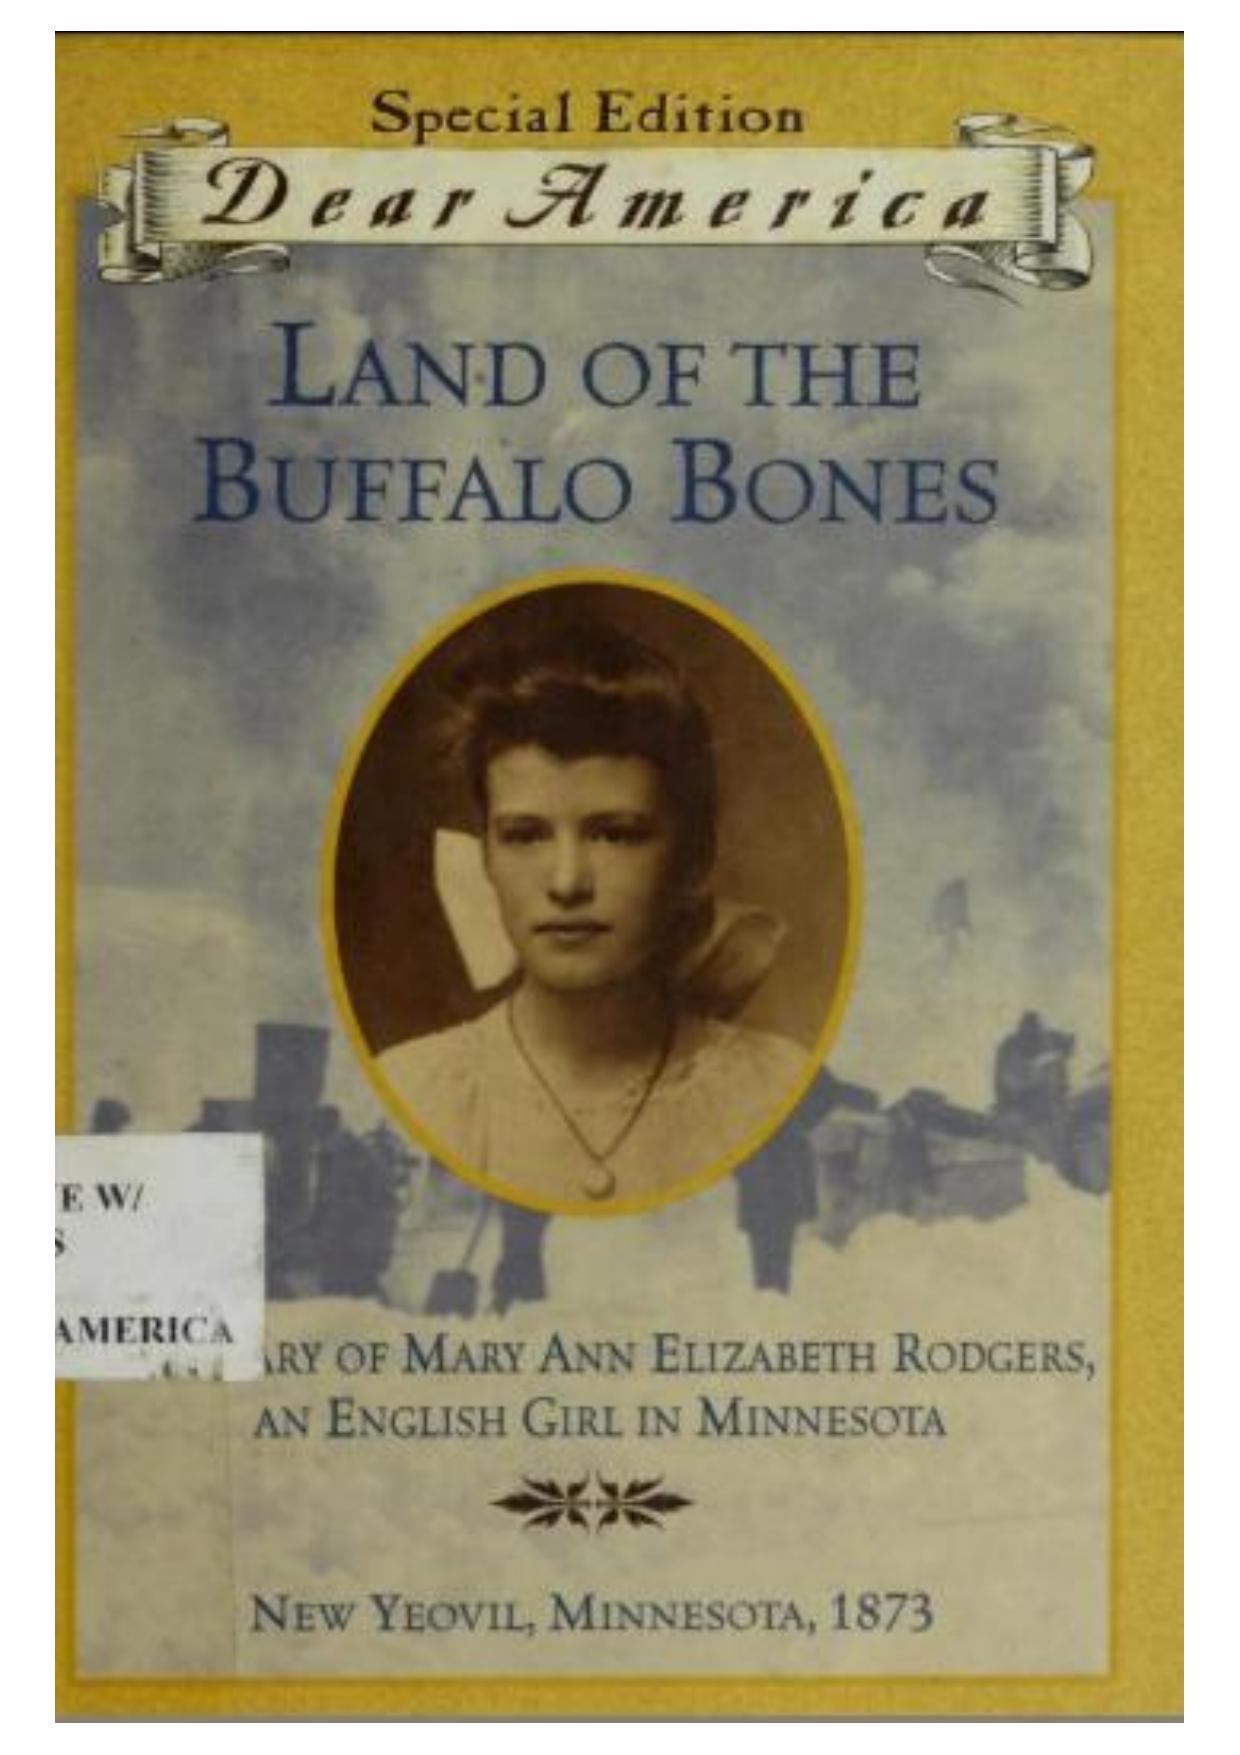 Land of the Buffalo Bones: The Diary of Mary Elizabeth Rodgers, an English Girl in Minnesota (Dear America) by Marion Dane Bauer